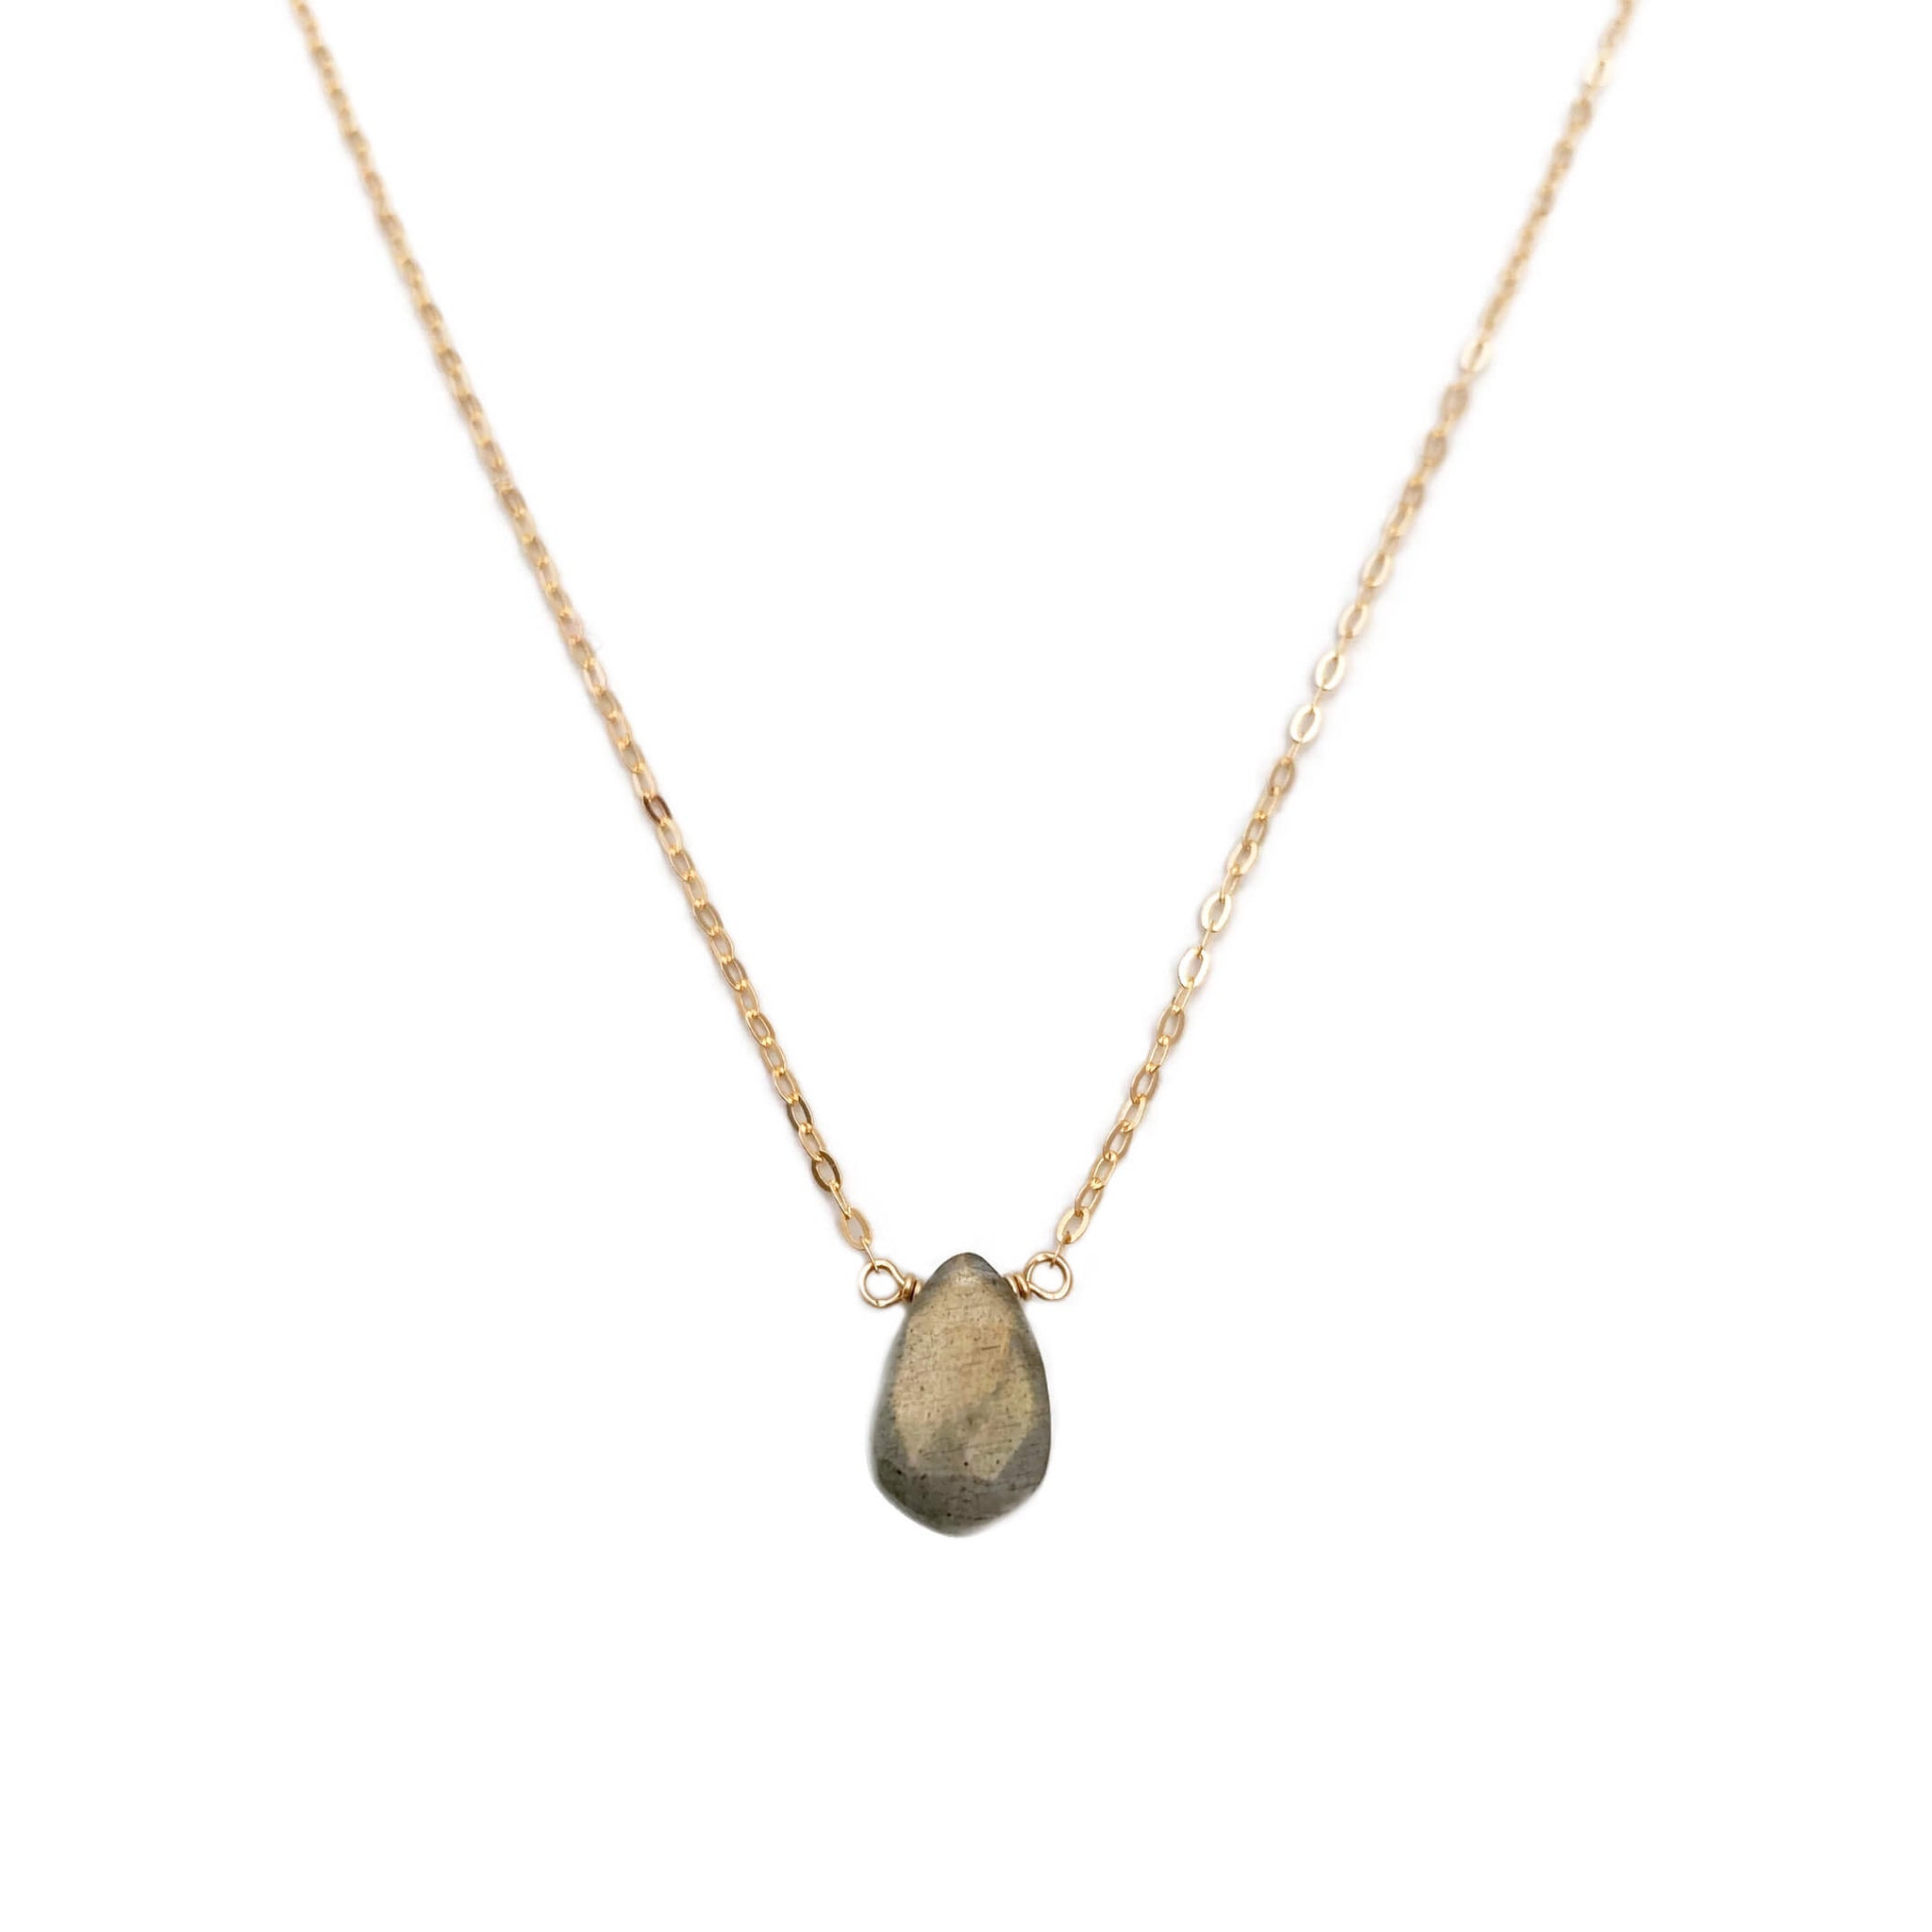 This labradorite healing necklace is made with a labradorite gemstone, a stone known for its energy and healing powers.  